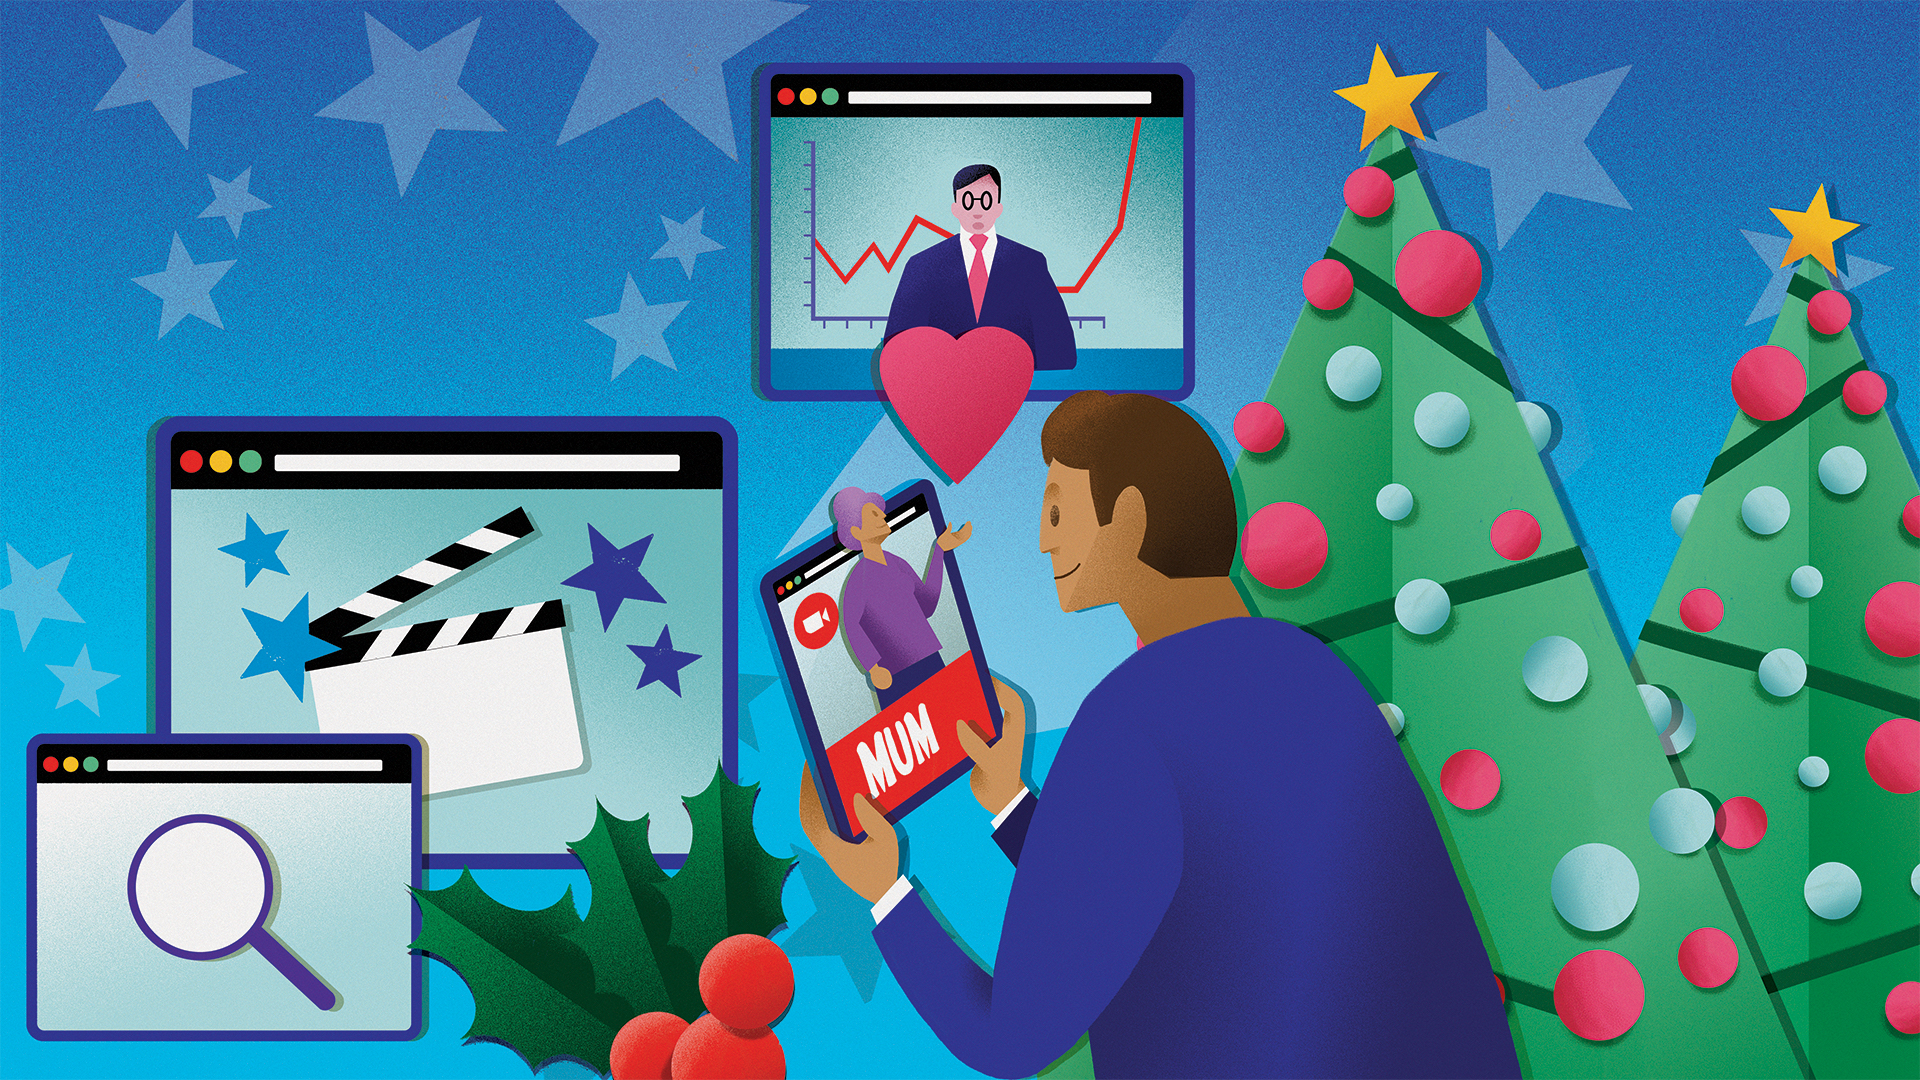 An illustration of a man looking at an iPad, talking to his Mum, surrounded by Christmas Trees, other computer windows show various uses for data/